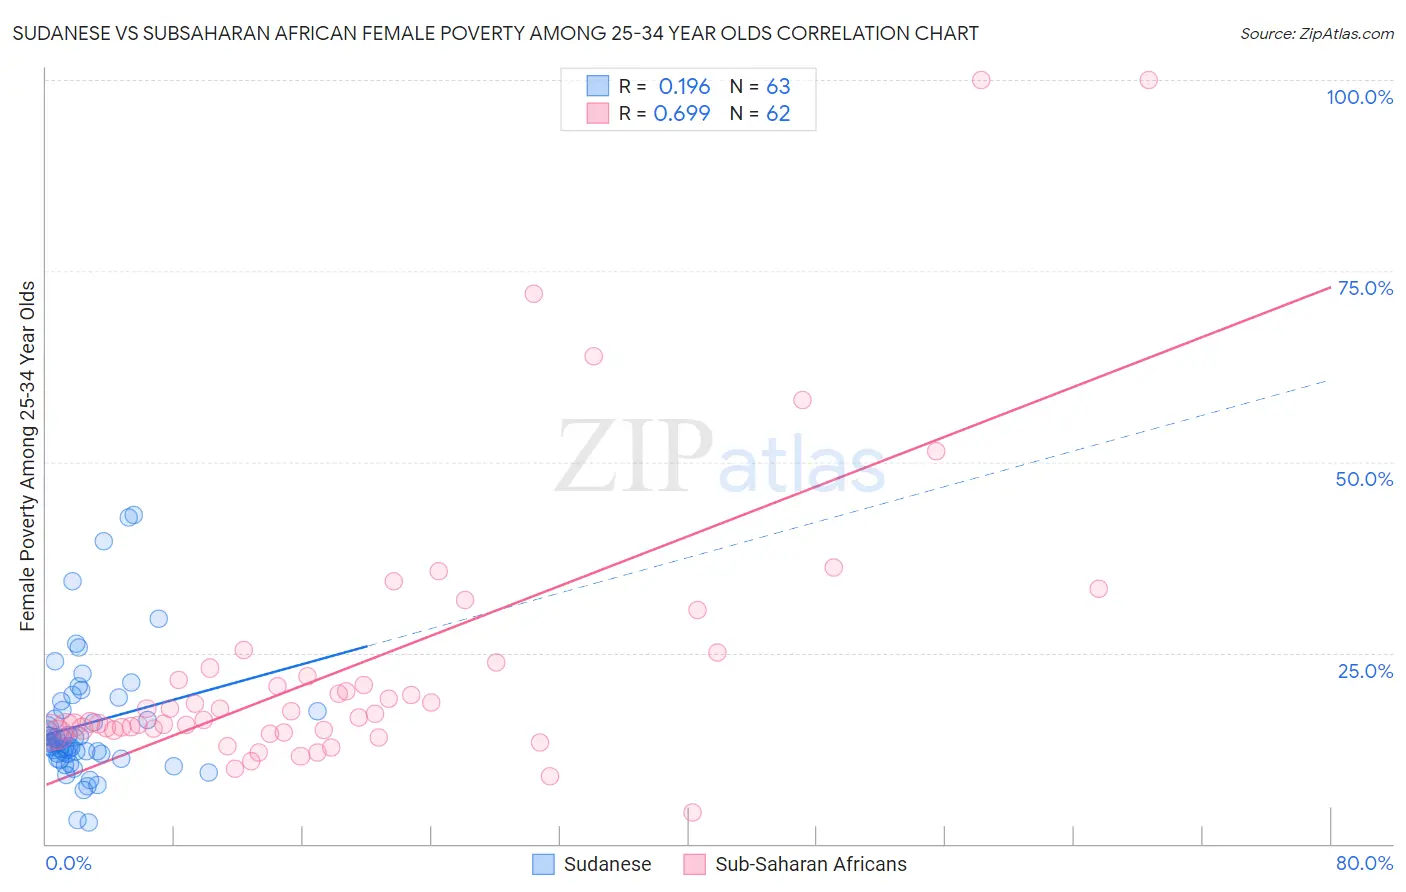 Sudanese vs Subsaharan African Female Poverty Among 25-34 Year Olds